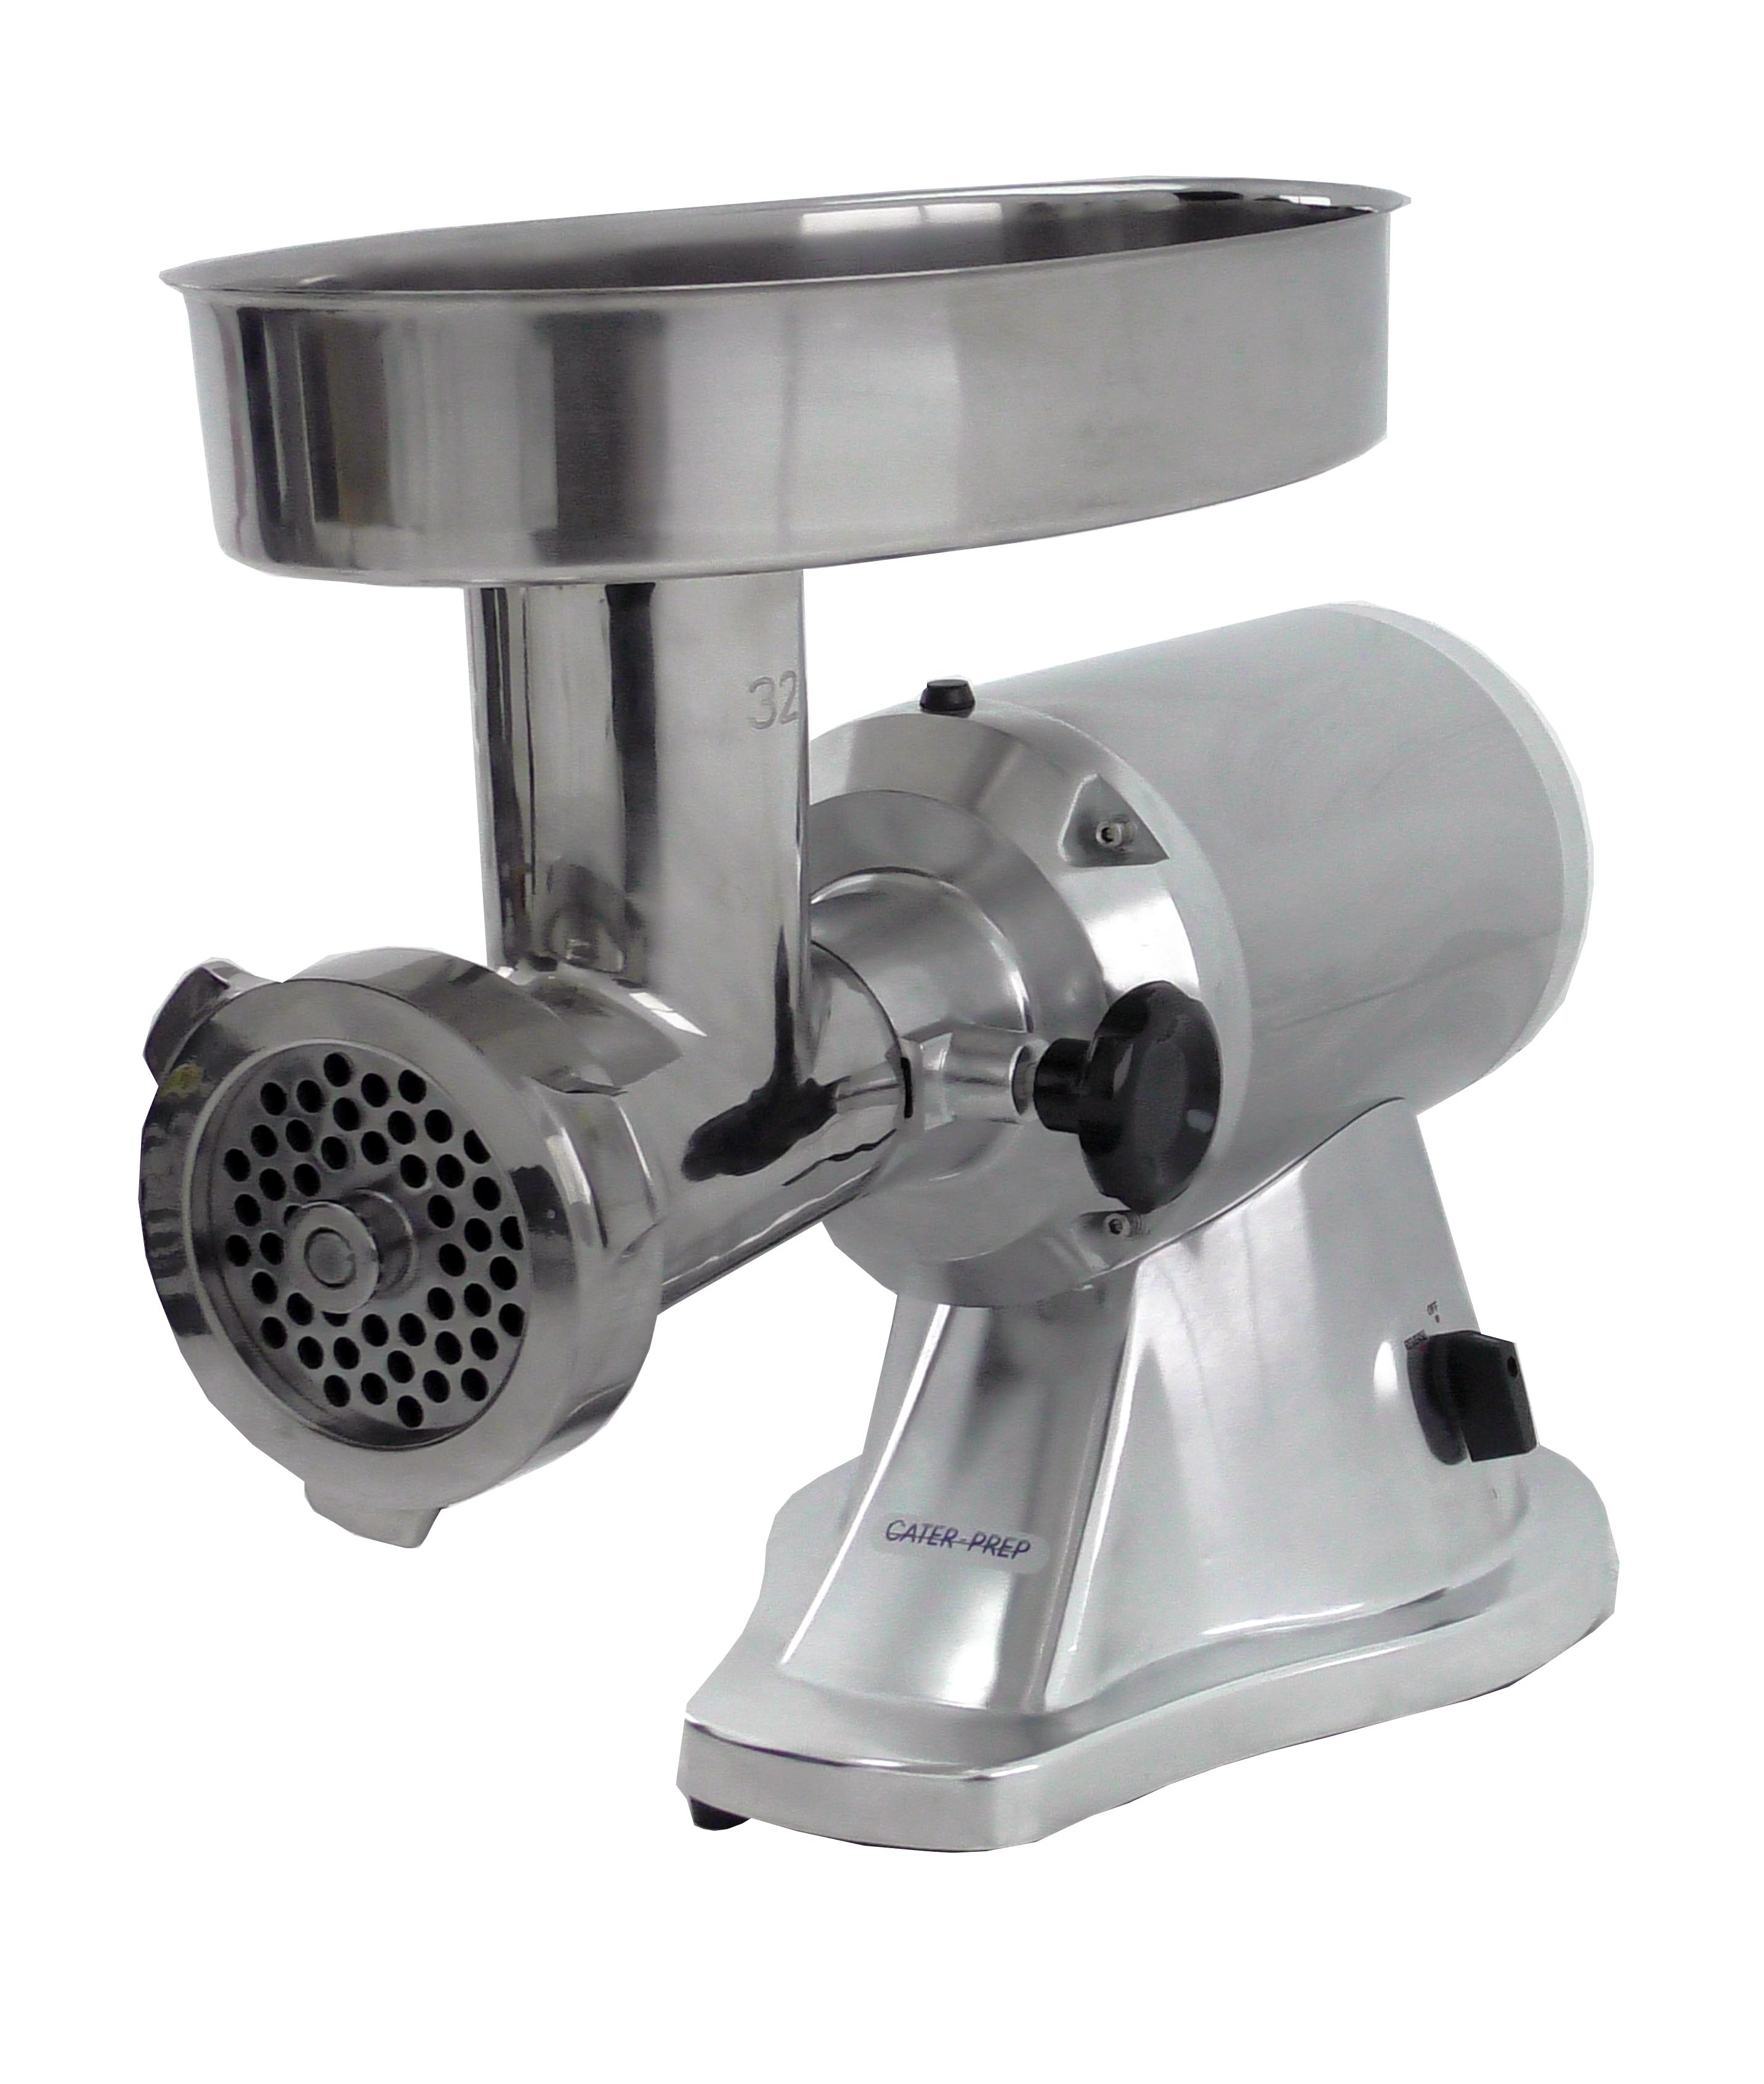 Cater-Prep CK0853A Heavy Duty Size 32 Meat Grinder - 330kg per hour